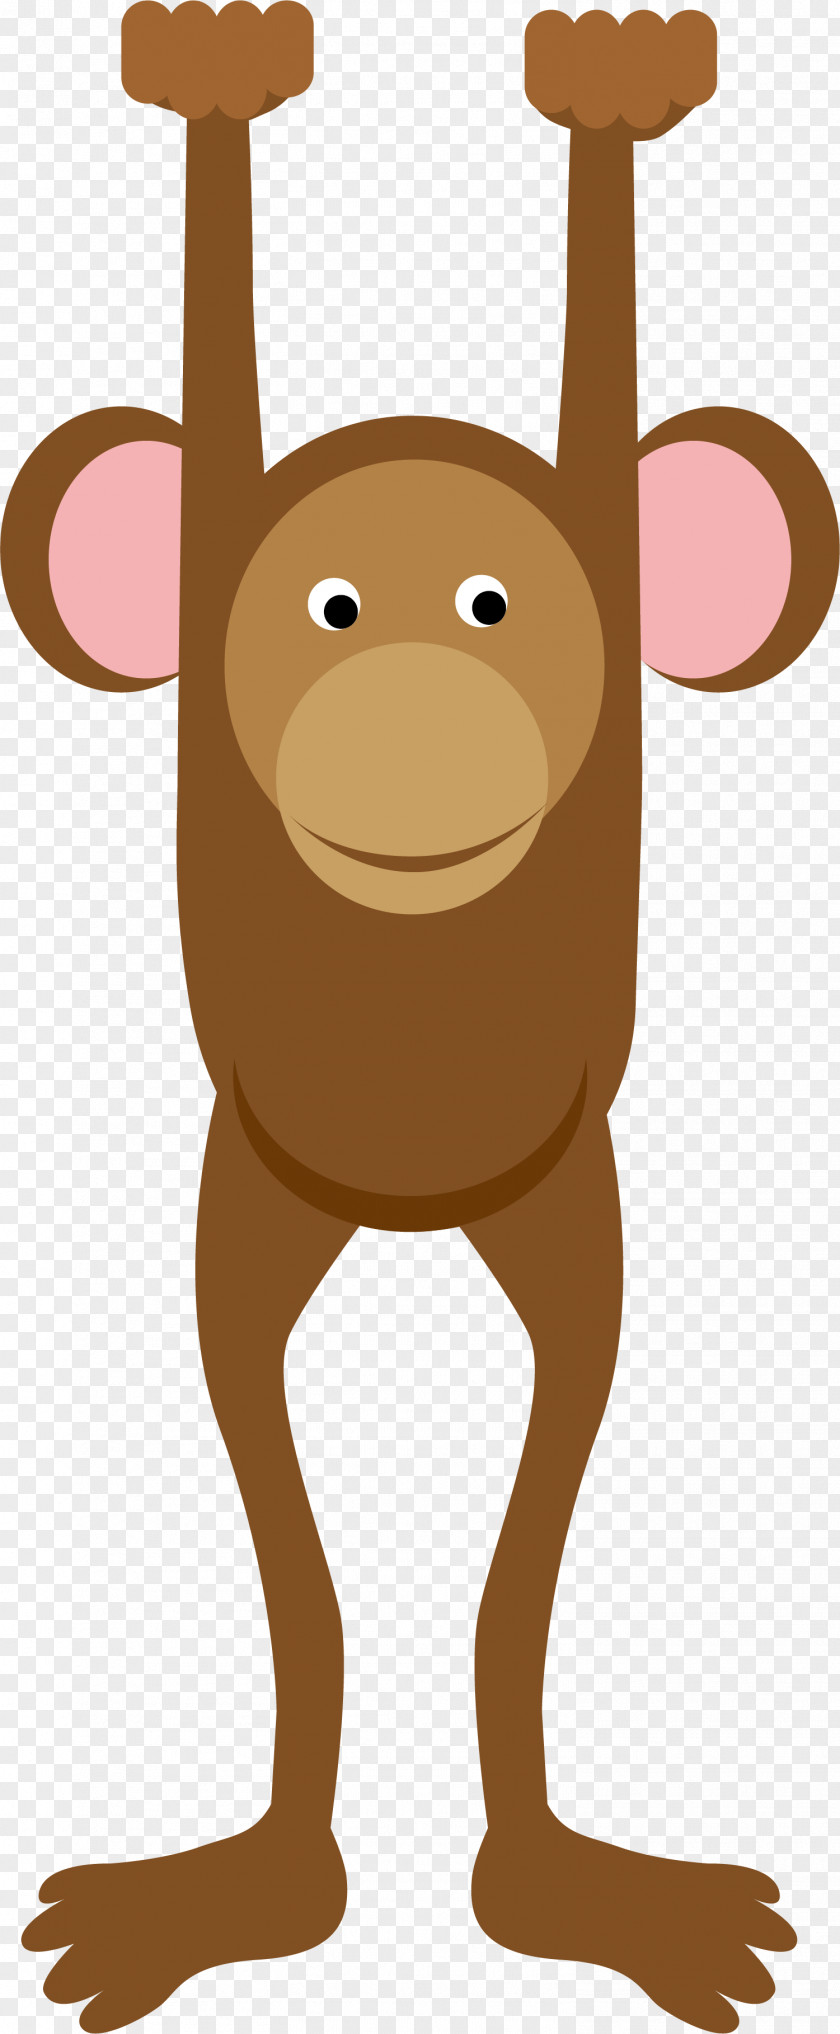 Hand Painted Brown Monkey Cartoon Clip Art PNG